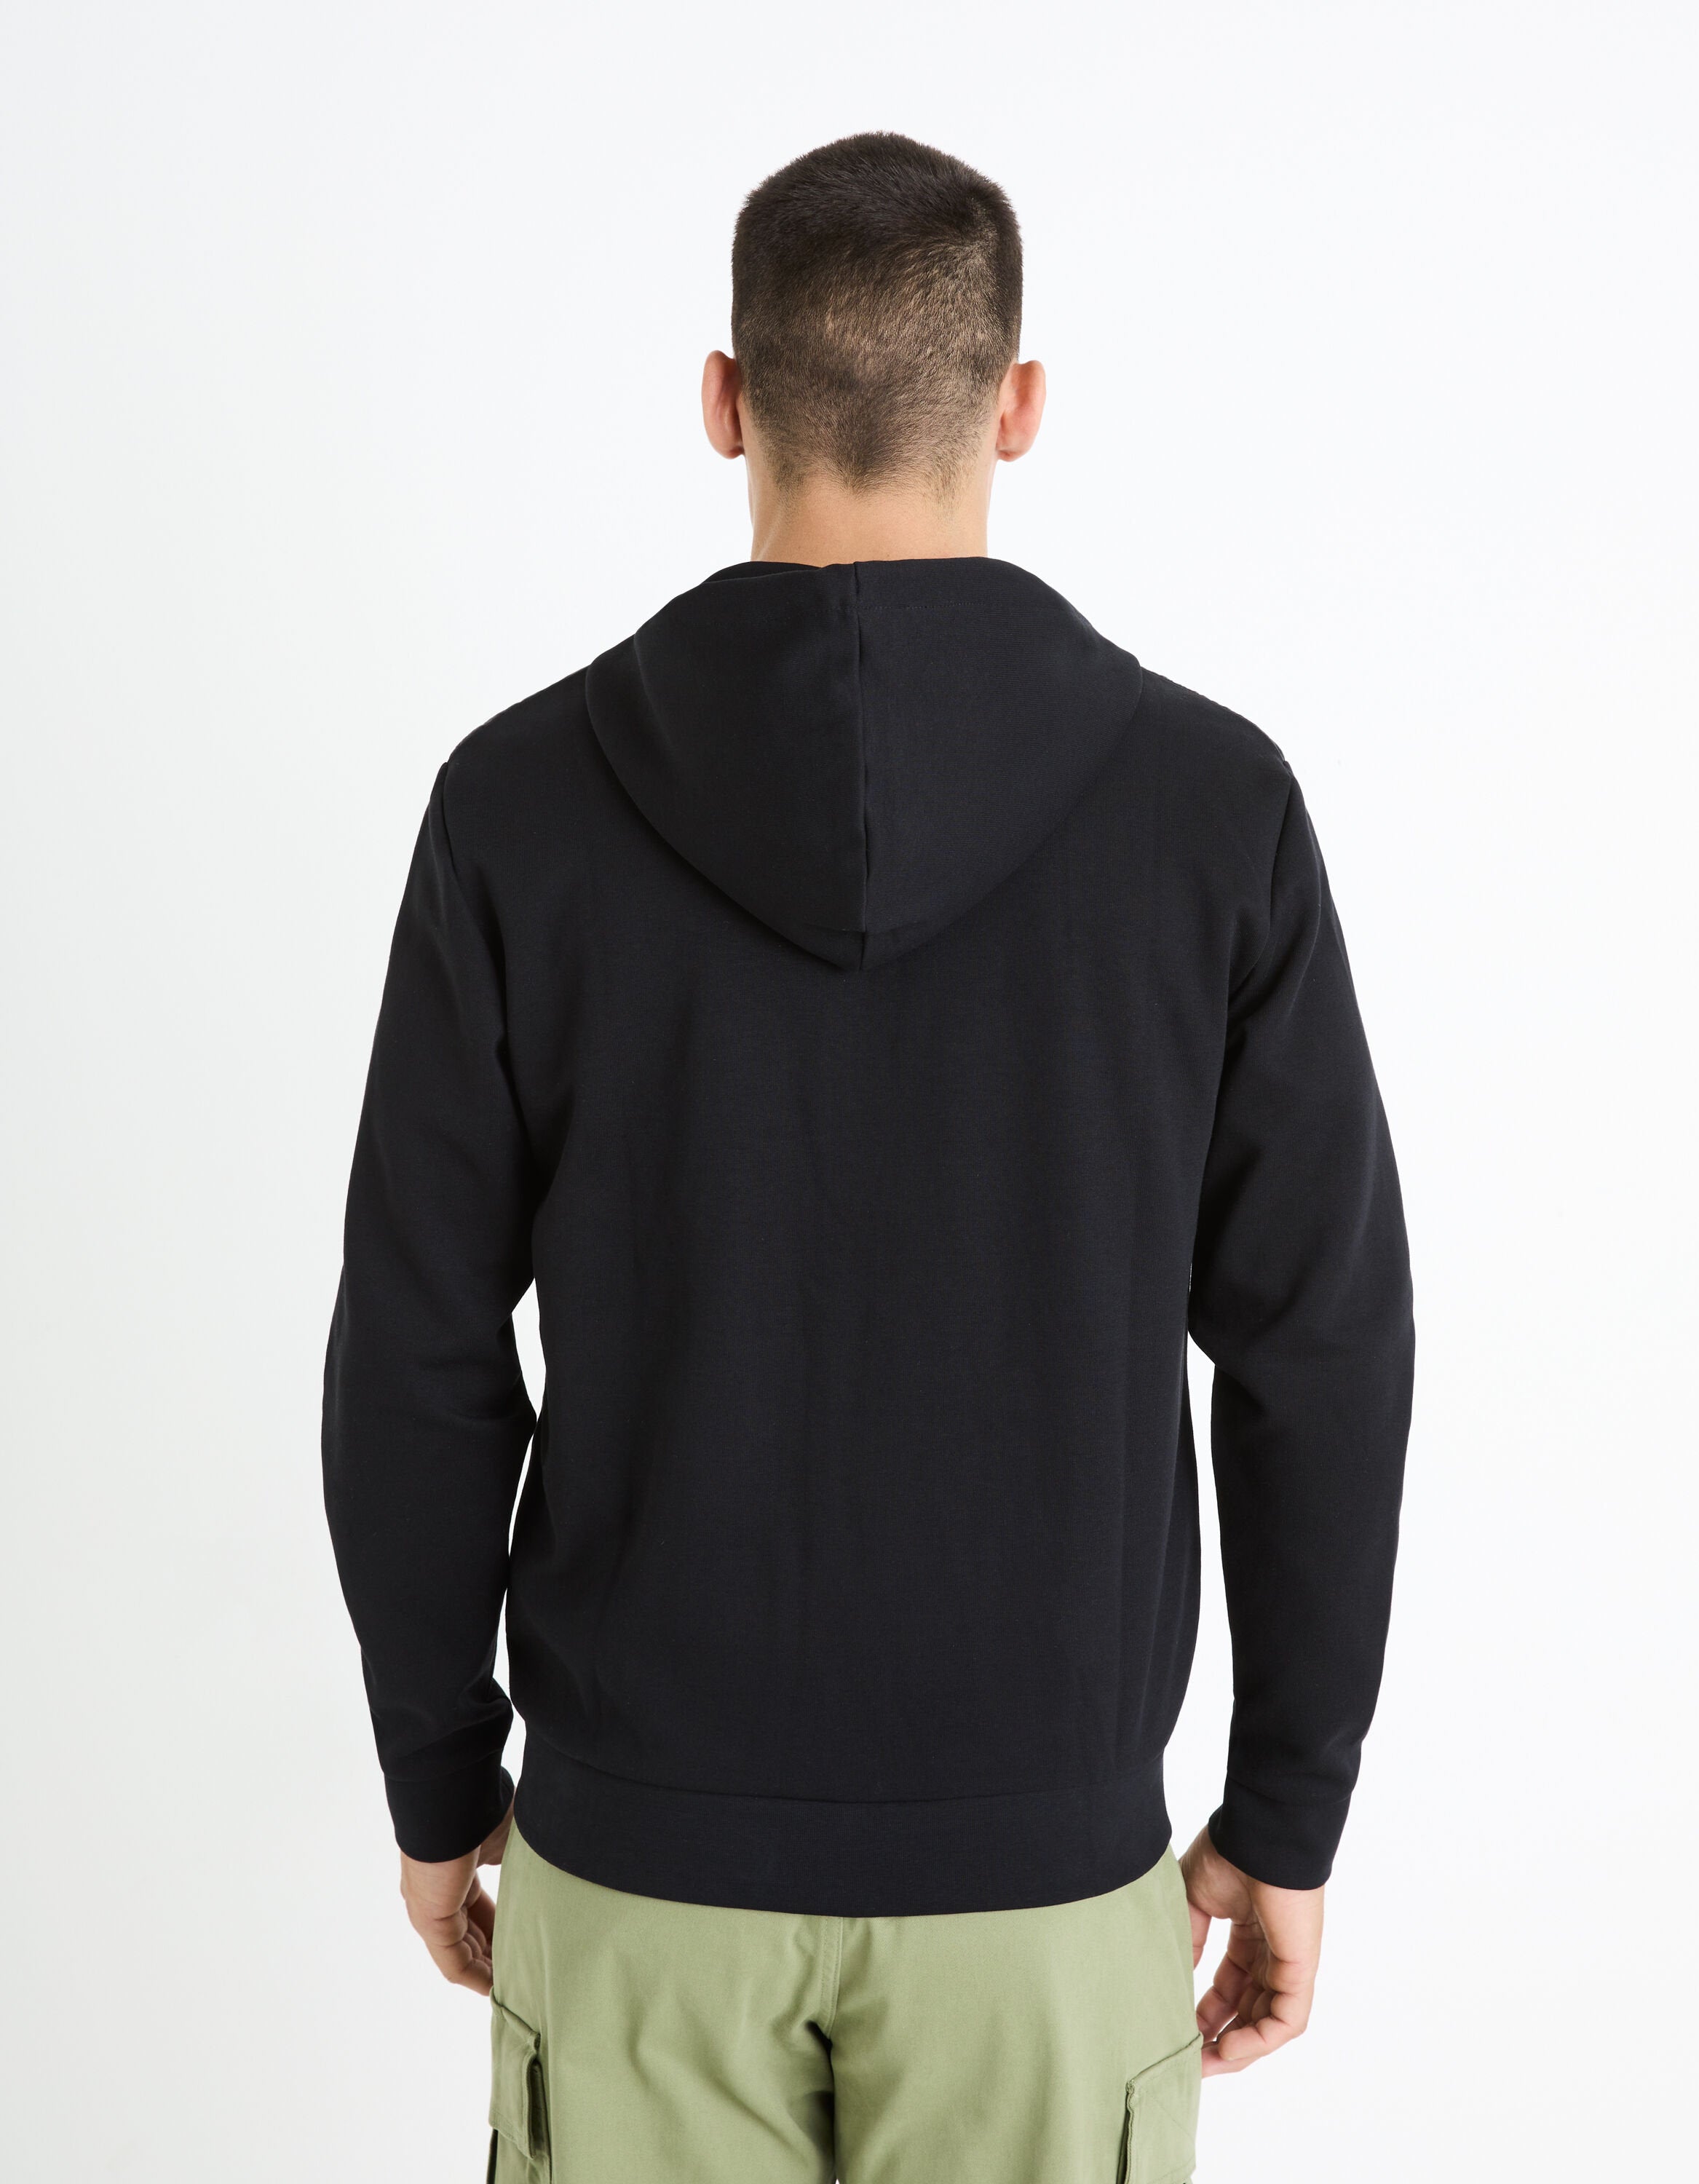 Cotton Blend Zipped Hooded Sweatshirt - Black_FEQUILTED_BLACK_04